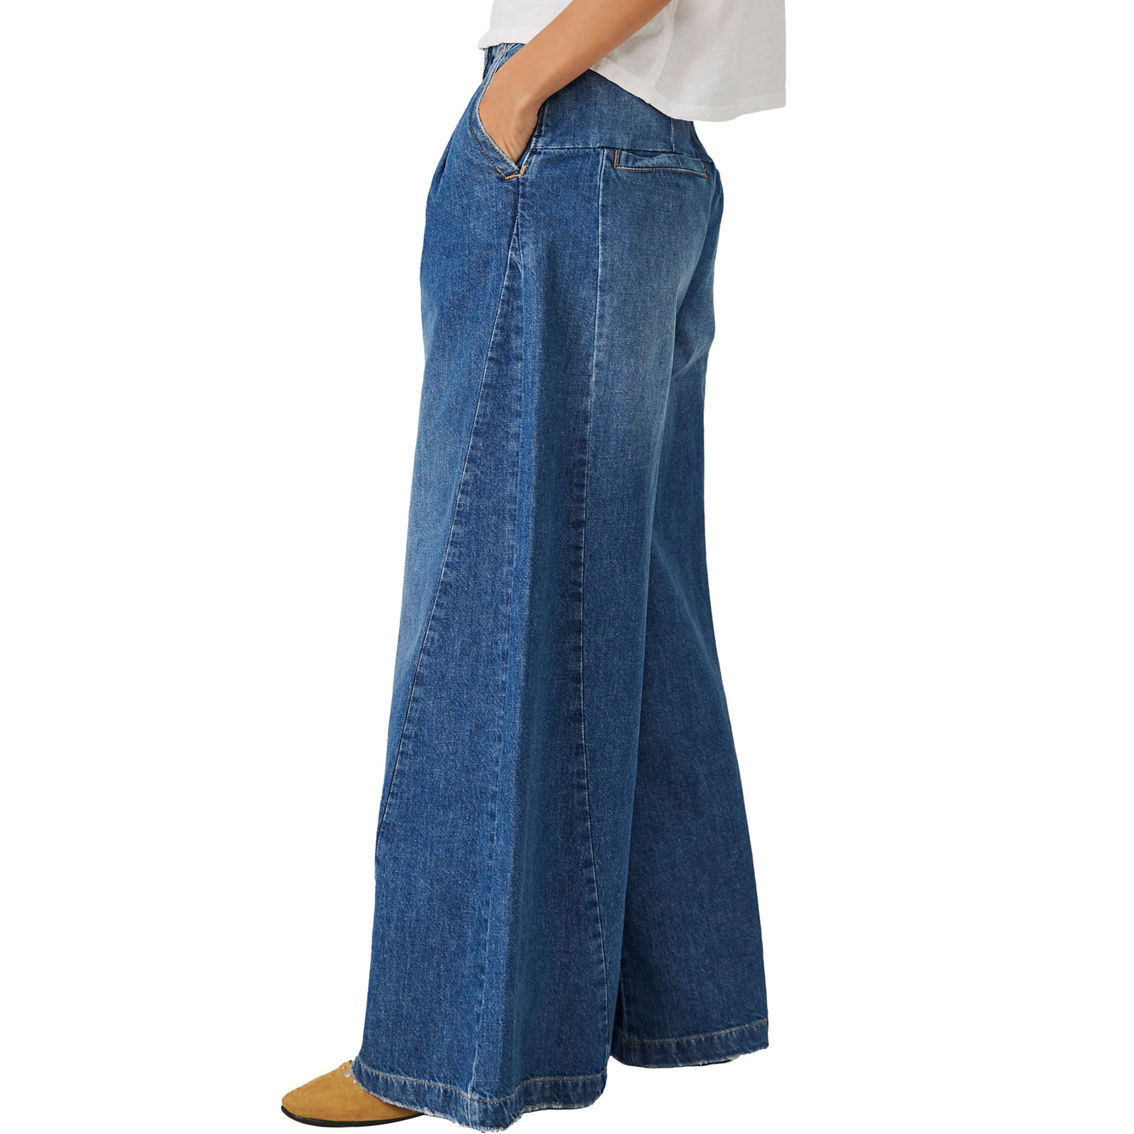 Free People Equinox Denim Trousers | Pants | Clothing & Accessories ...